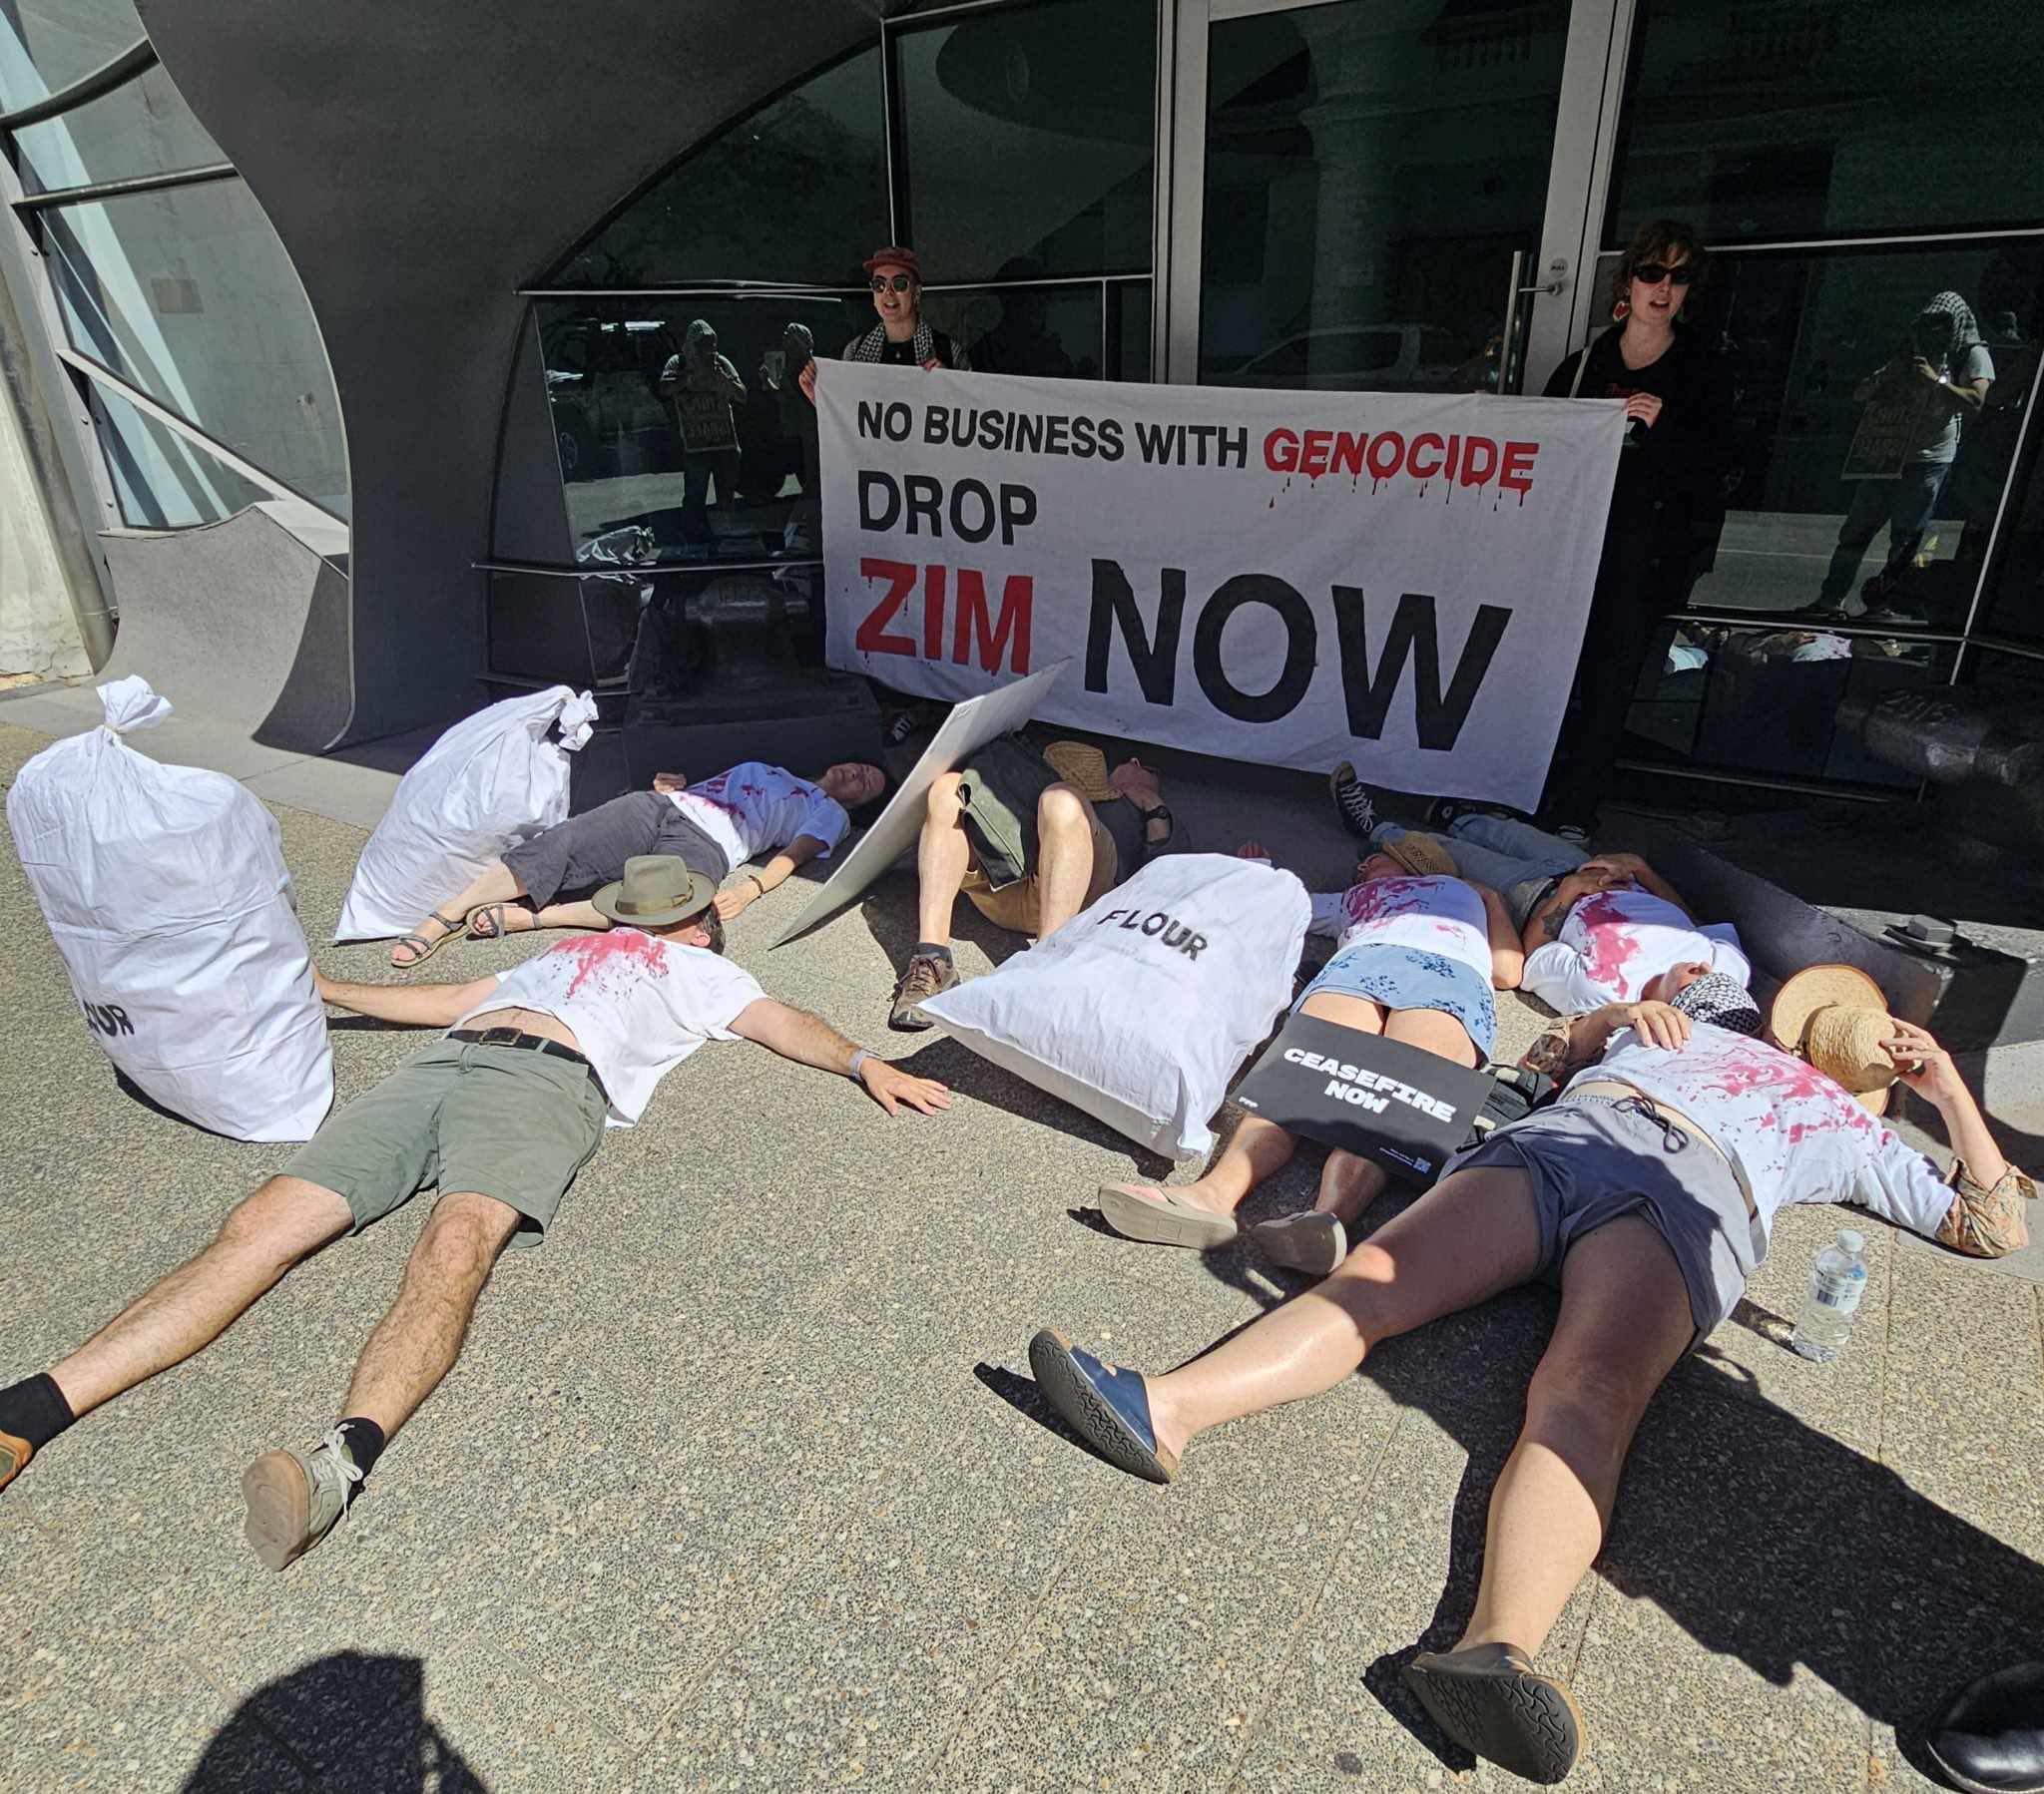 Protesters stage die-in